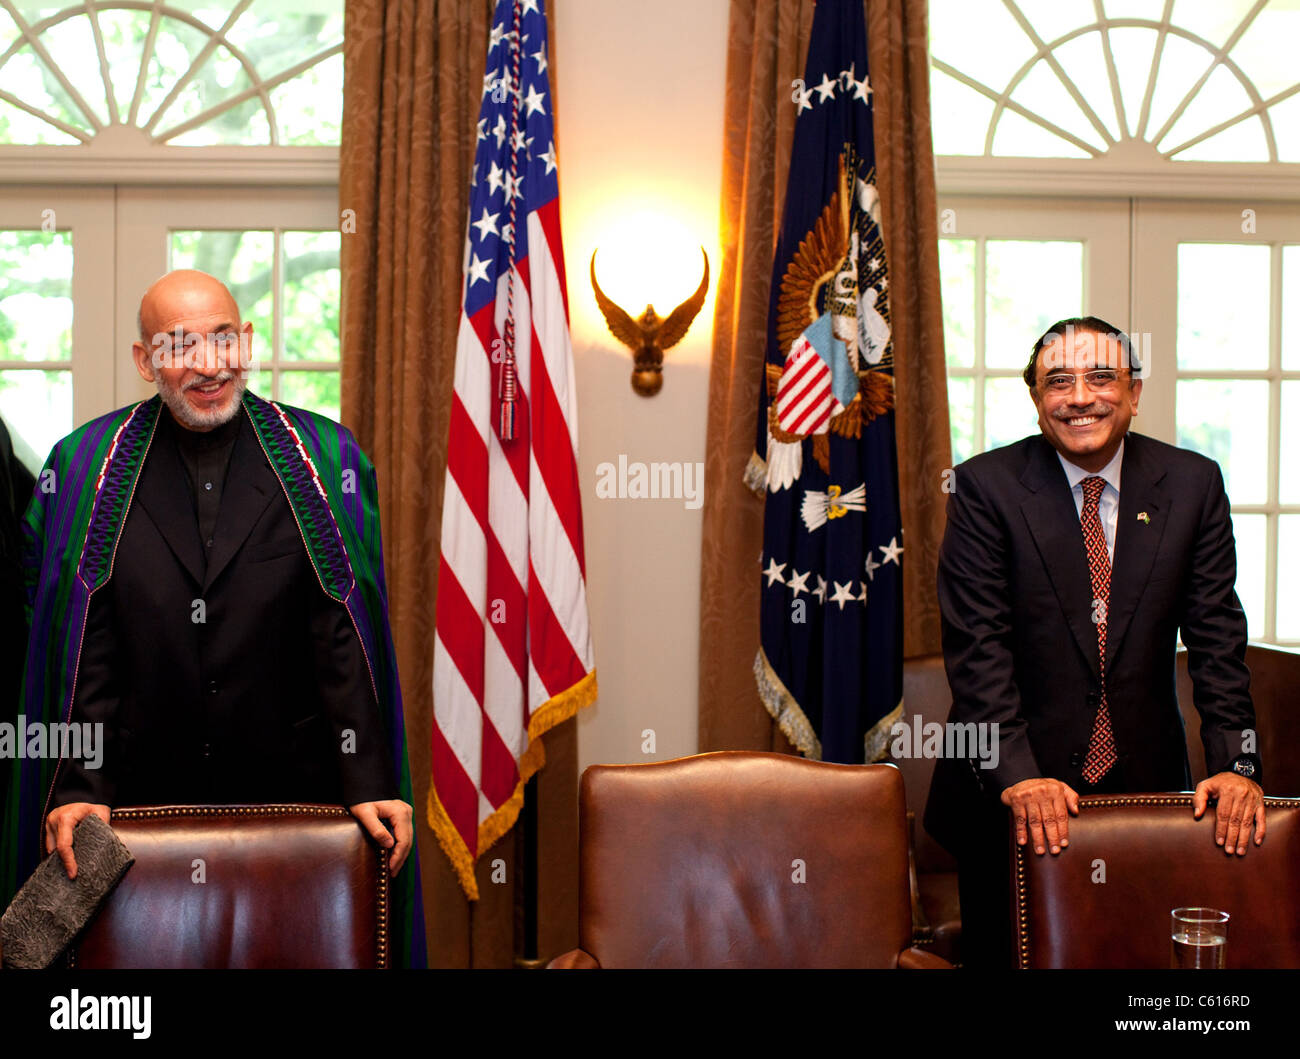 Afghan President Hamid Karzai left and Pakistan President Asif Ali Zardari wait for President Obama before a meeting at the White House. May 6 2009. (BSWH 2011 8 211) Stock Photo